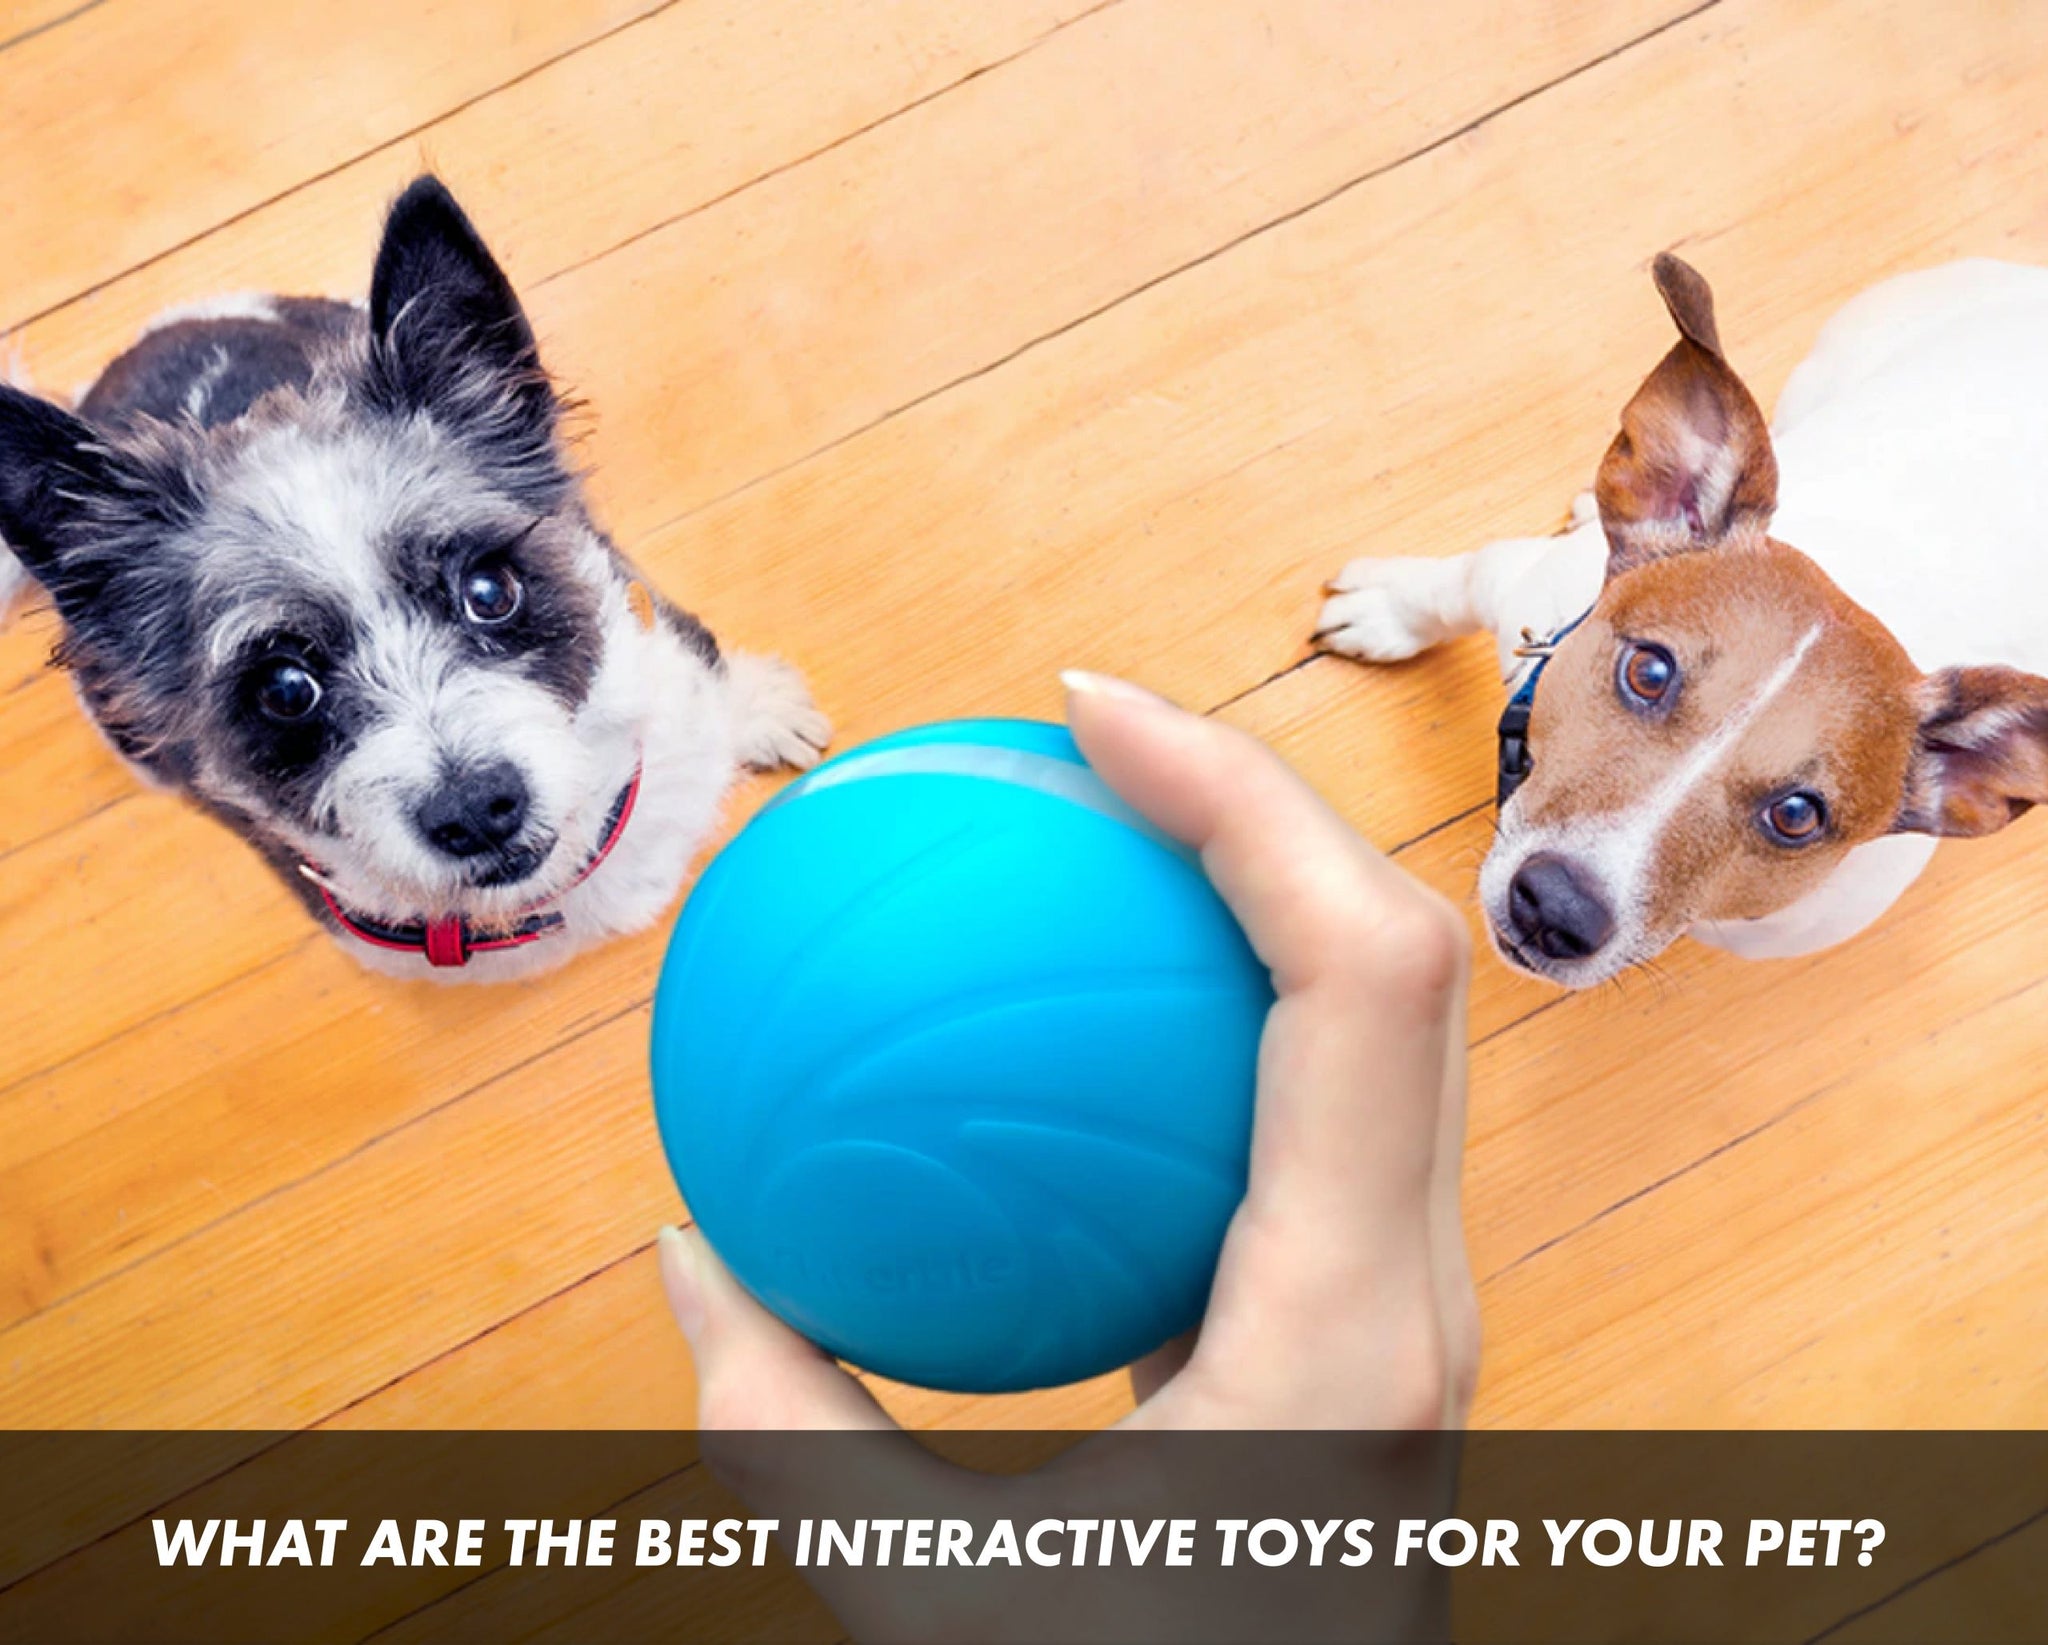 Cheerble's Wickedbone is a fun smart dog toy with a mind of its